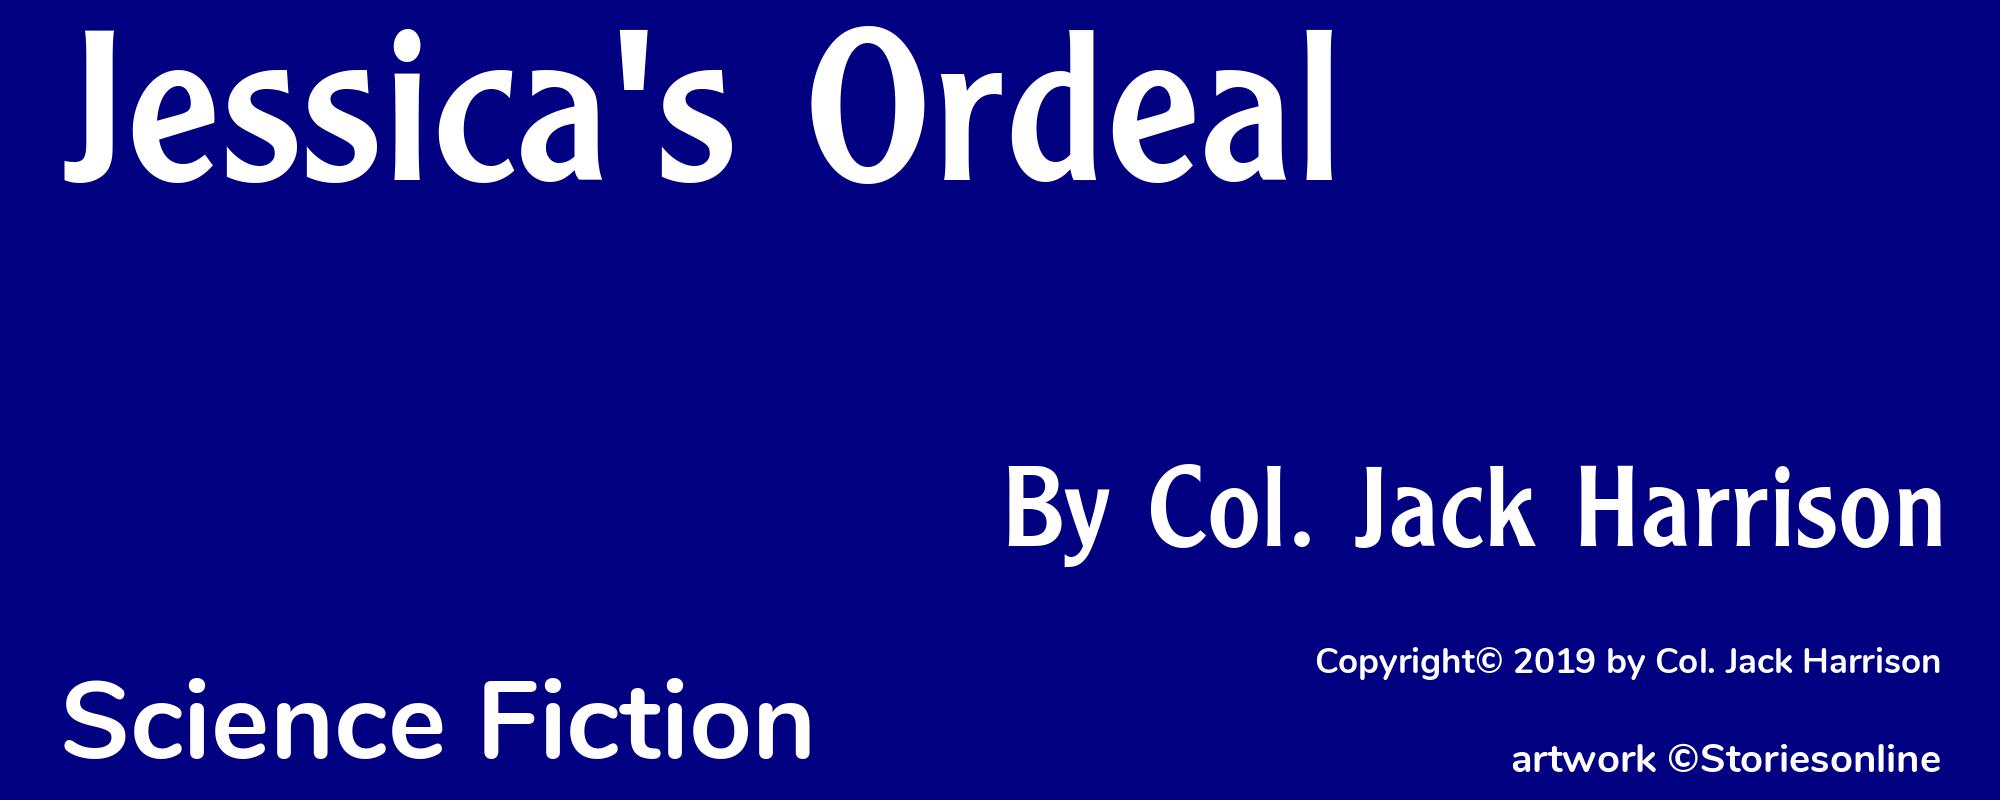 Jessica's Ordeal - Cover